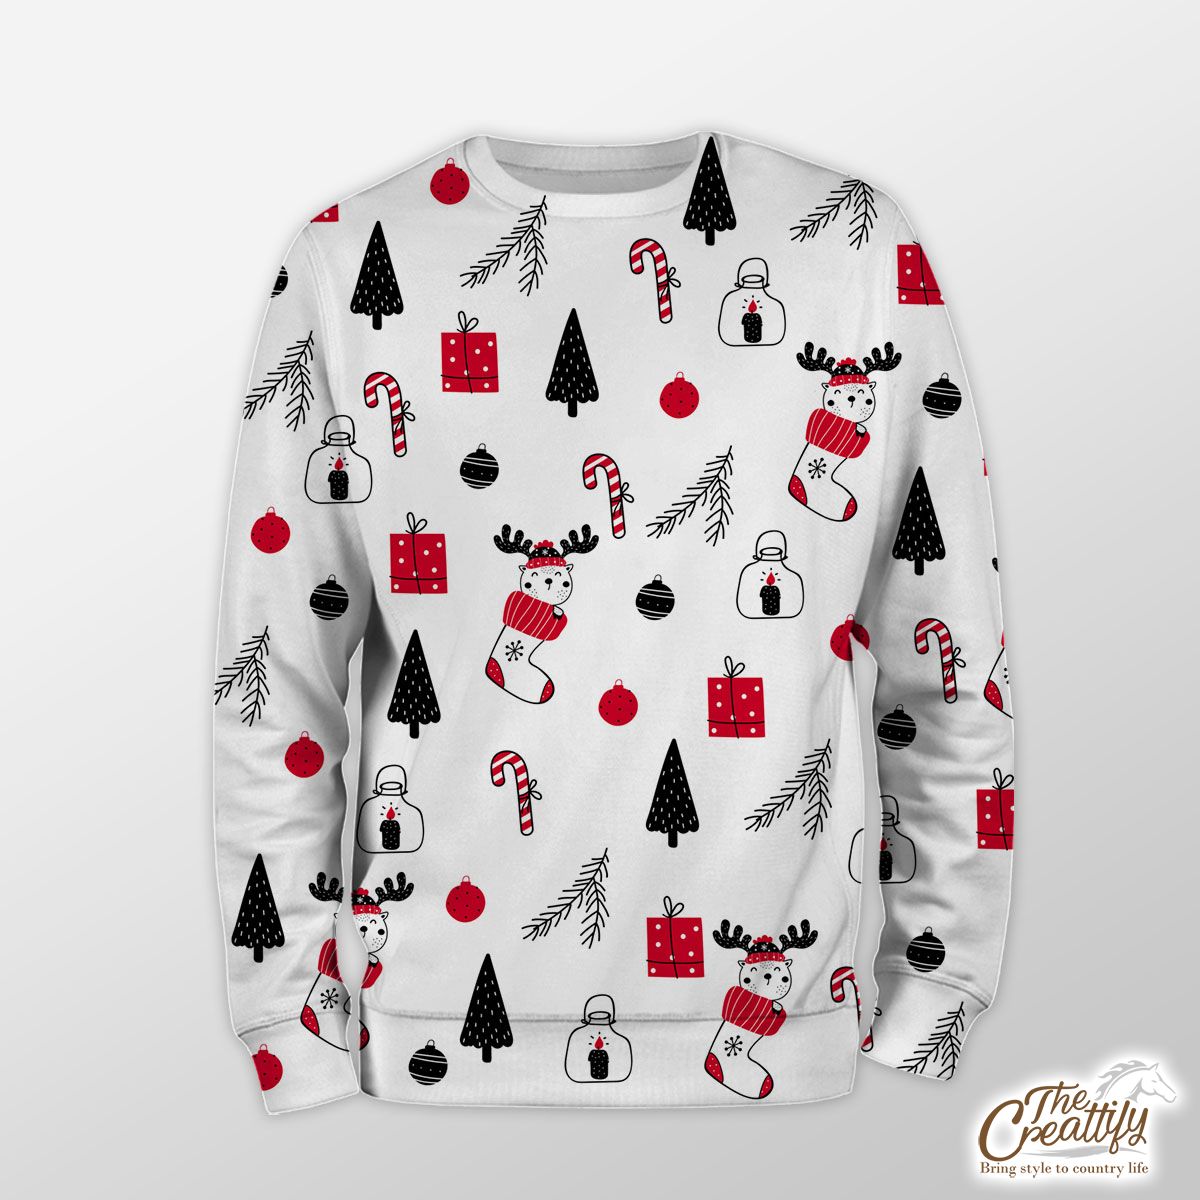 Reindeer Clipart In Hand Drawn Red Socks, Christmas Balls, Candy Canes, And Christmas Gifts Seamless White Pattern Sweatshirt